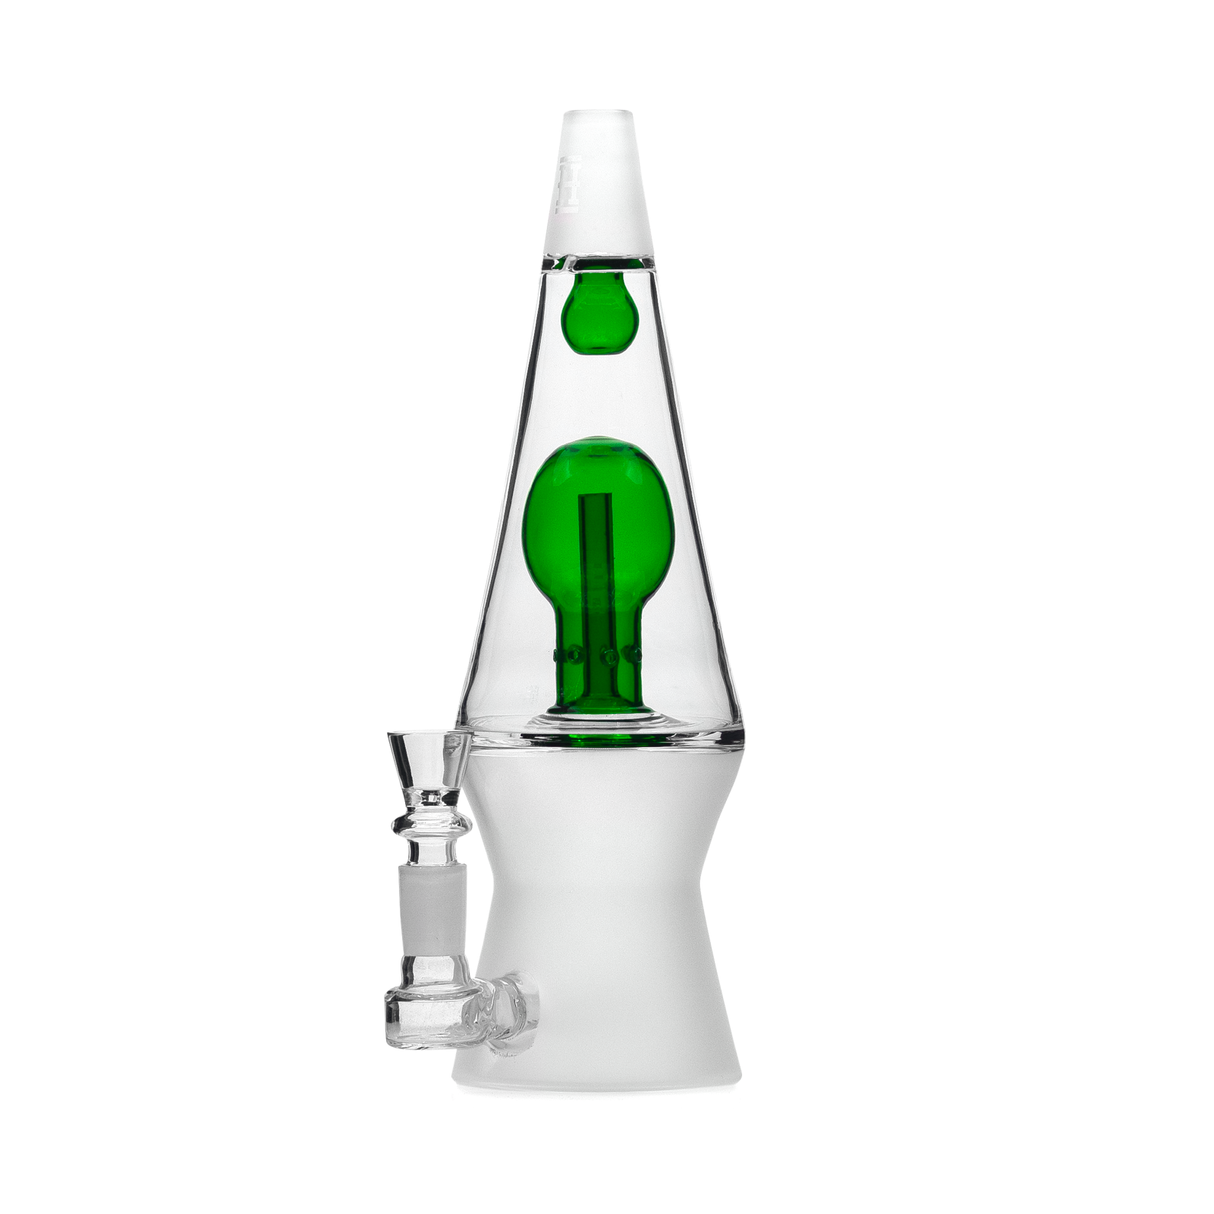 Hemper 70's XL Bong in Green, 10-inch Height, 14mm Joint, Front View on White Background